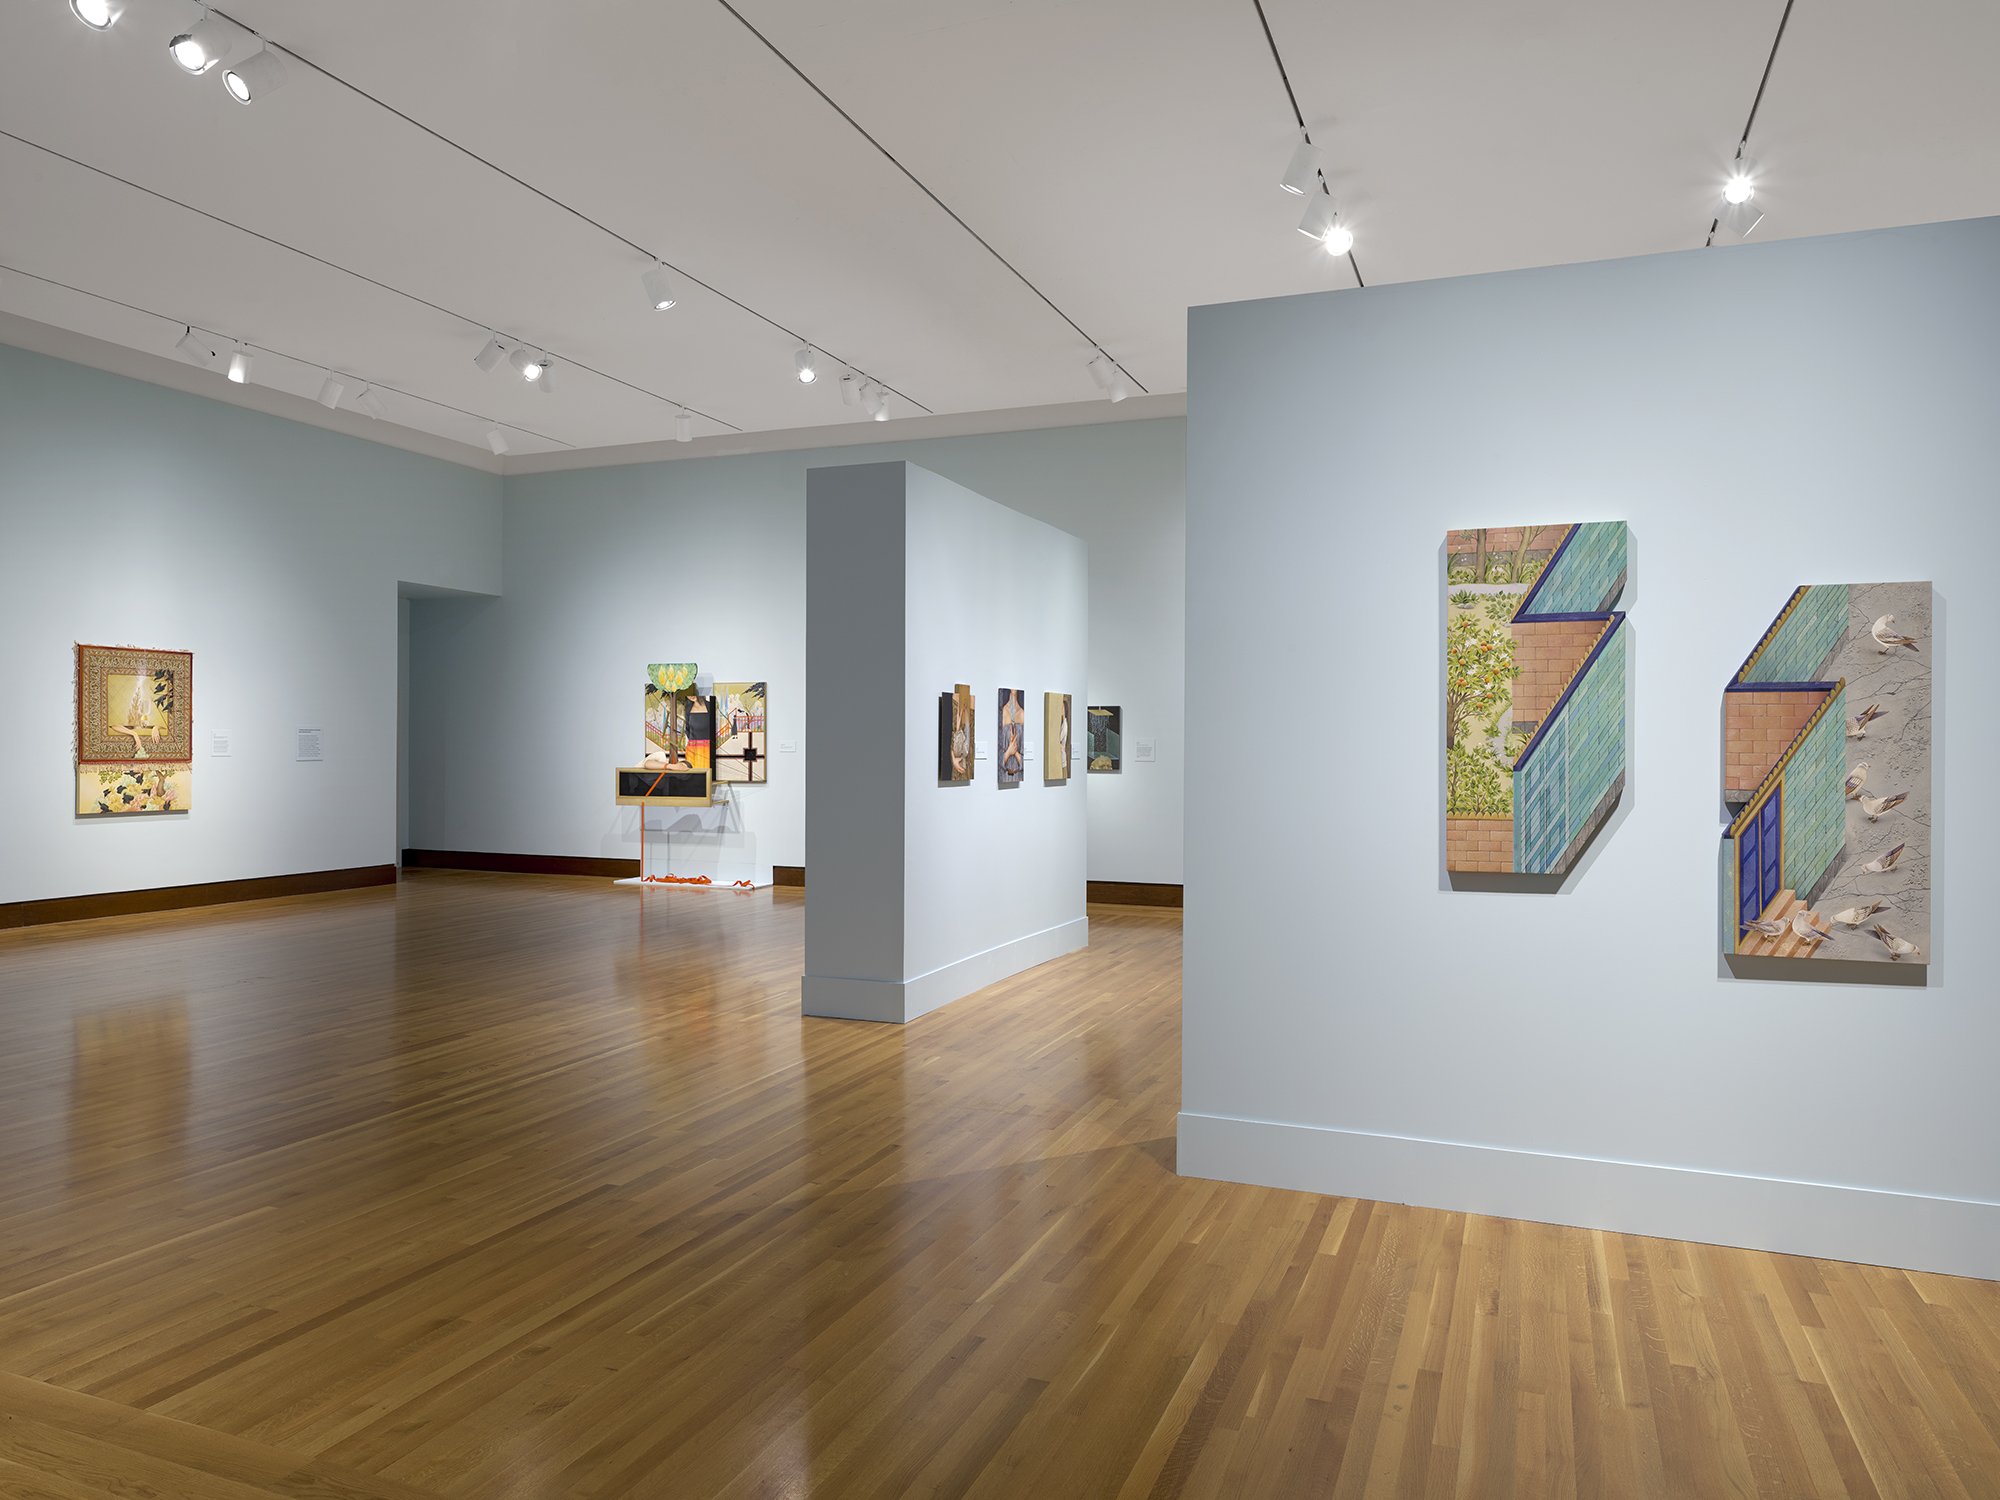  Solo Exhibition, Currier Museum, Manchester, New Hampshire, April 2022 